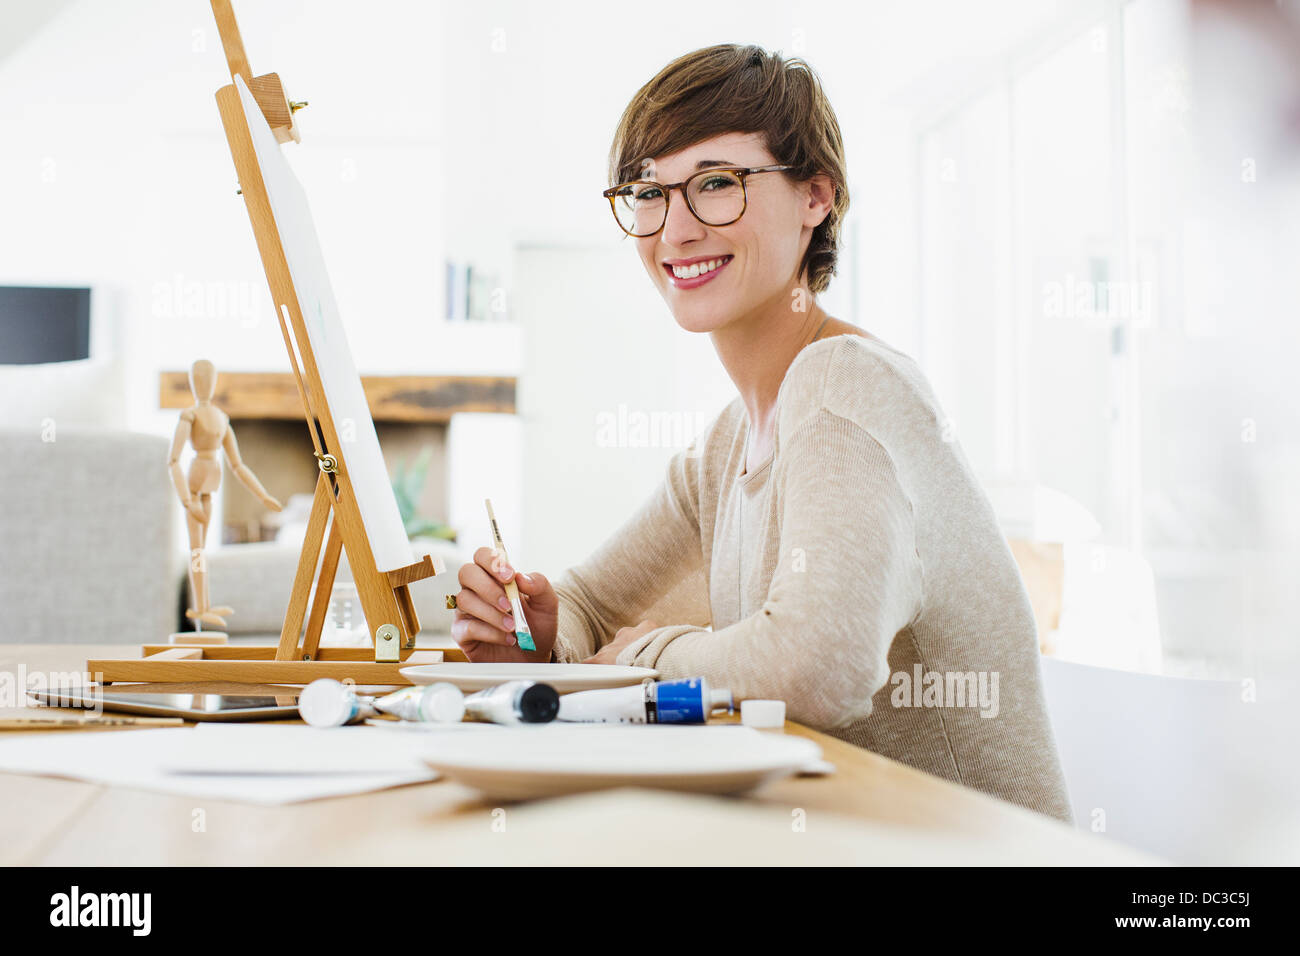 Portrait of smiling woman painting at easel on table Banque D'Images